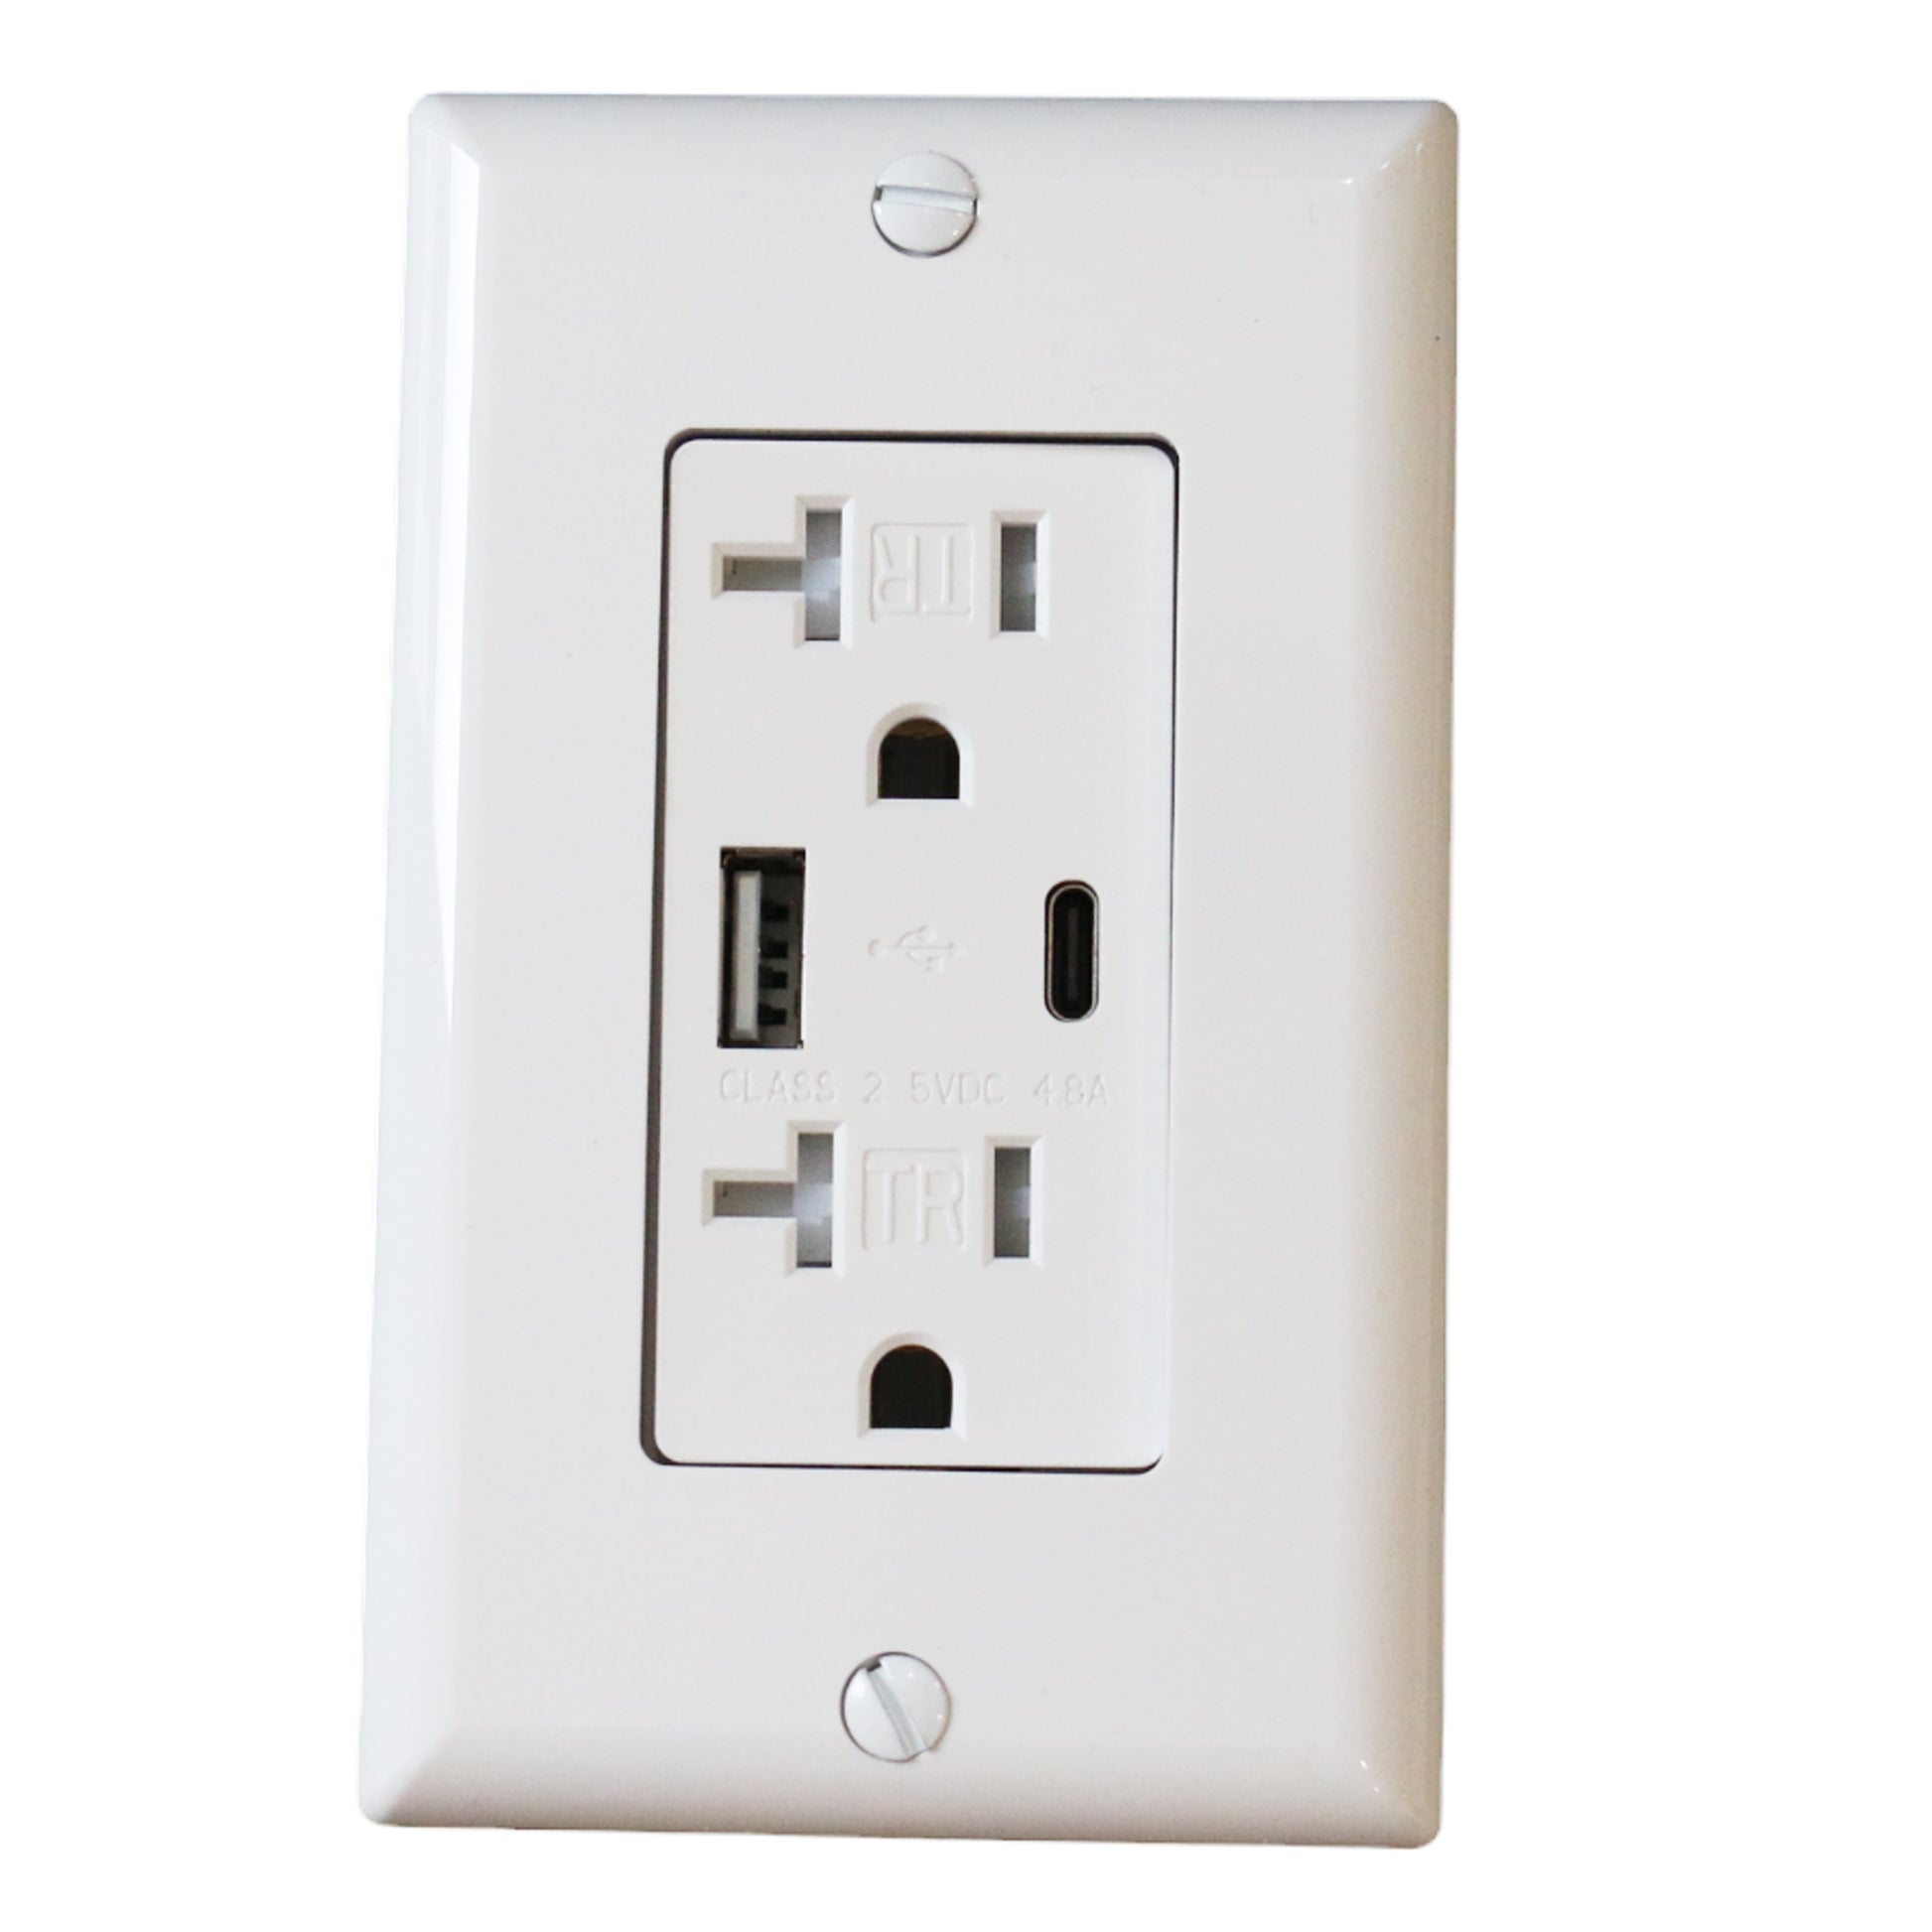 USB Charger Wall Outlet, USB Receptacle with Type A & Type C USB Ports, 20A Duplex Tamper Resistant Receptacle,UL Listed